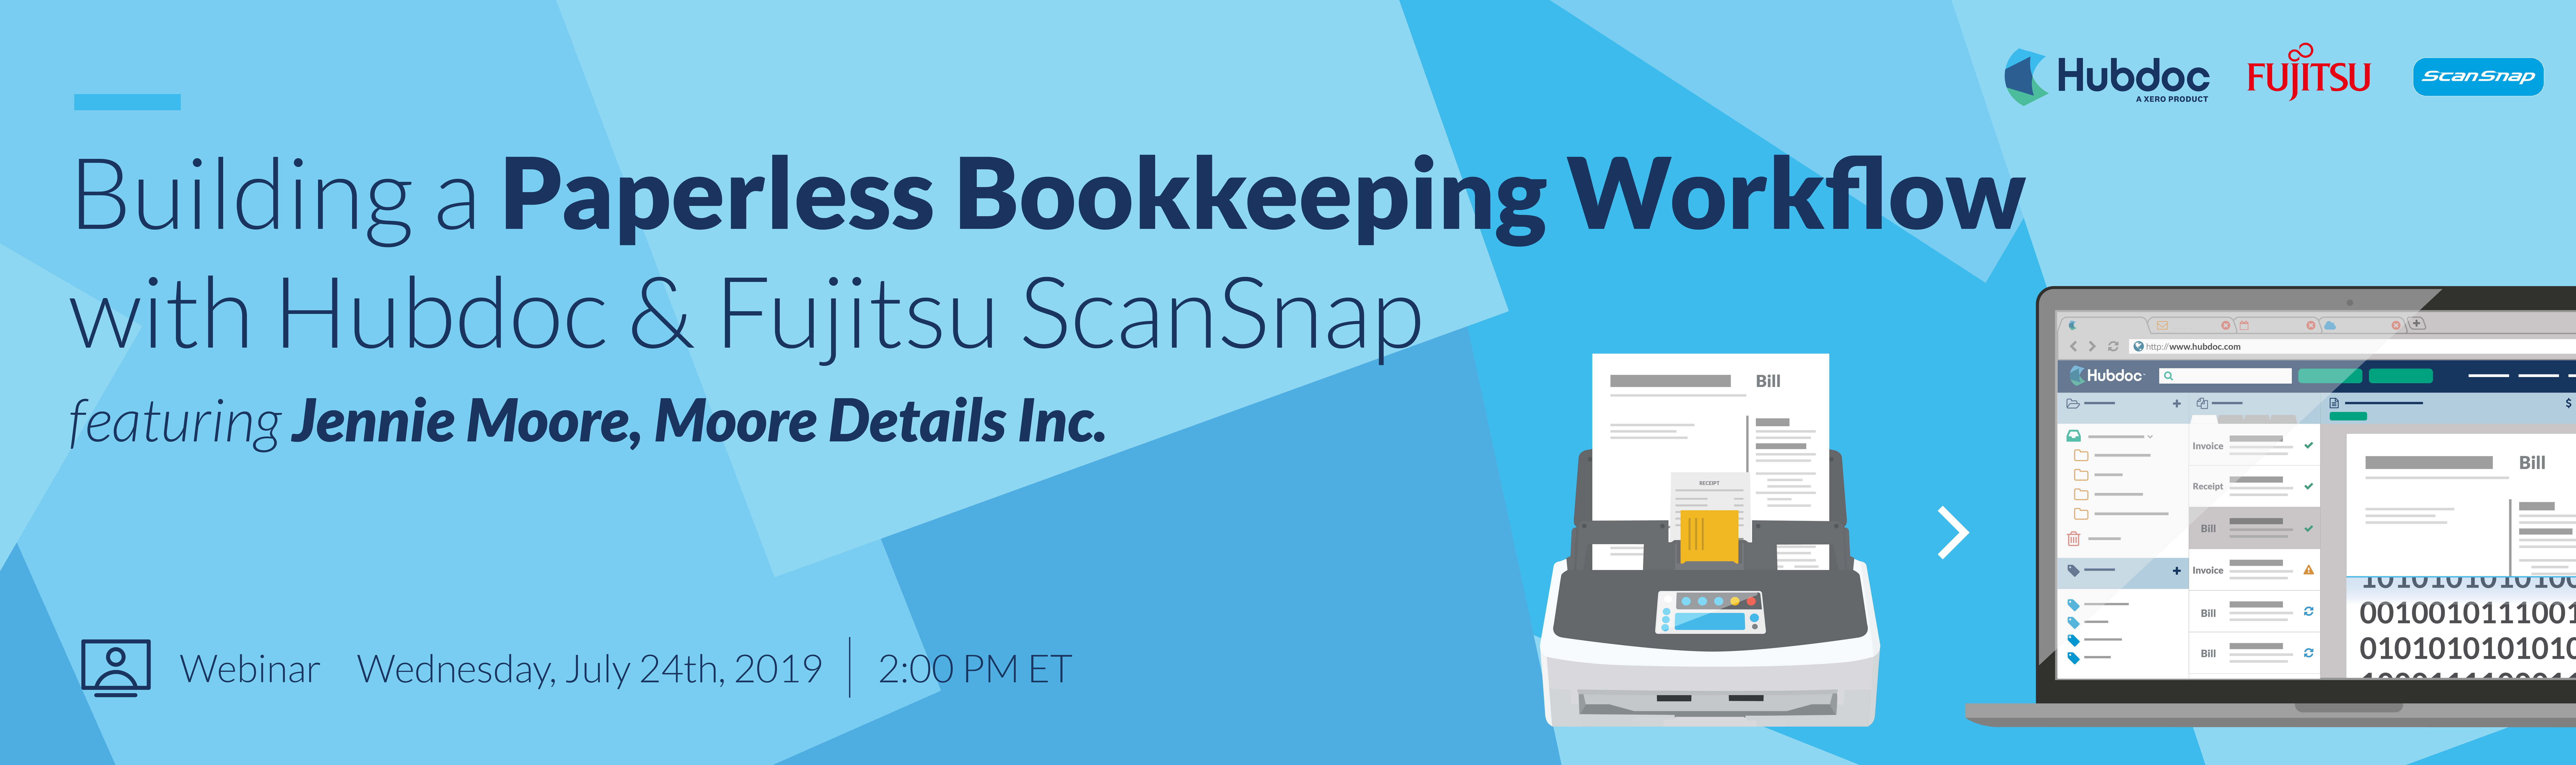 Building a Paperless Bookkeeping Workflow with Hubdoc & Fujitsu ScanSnap